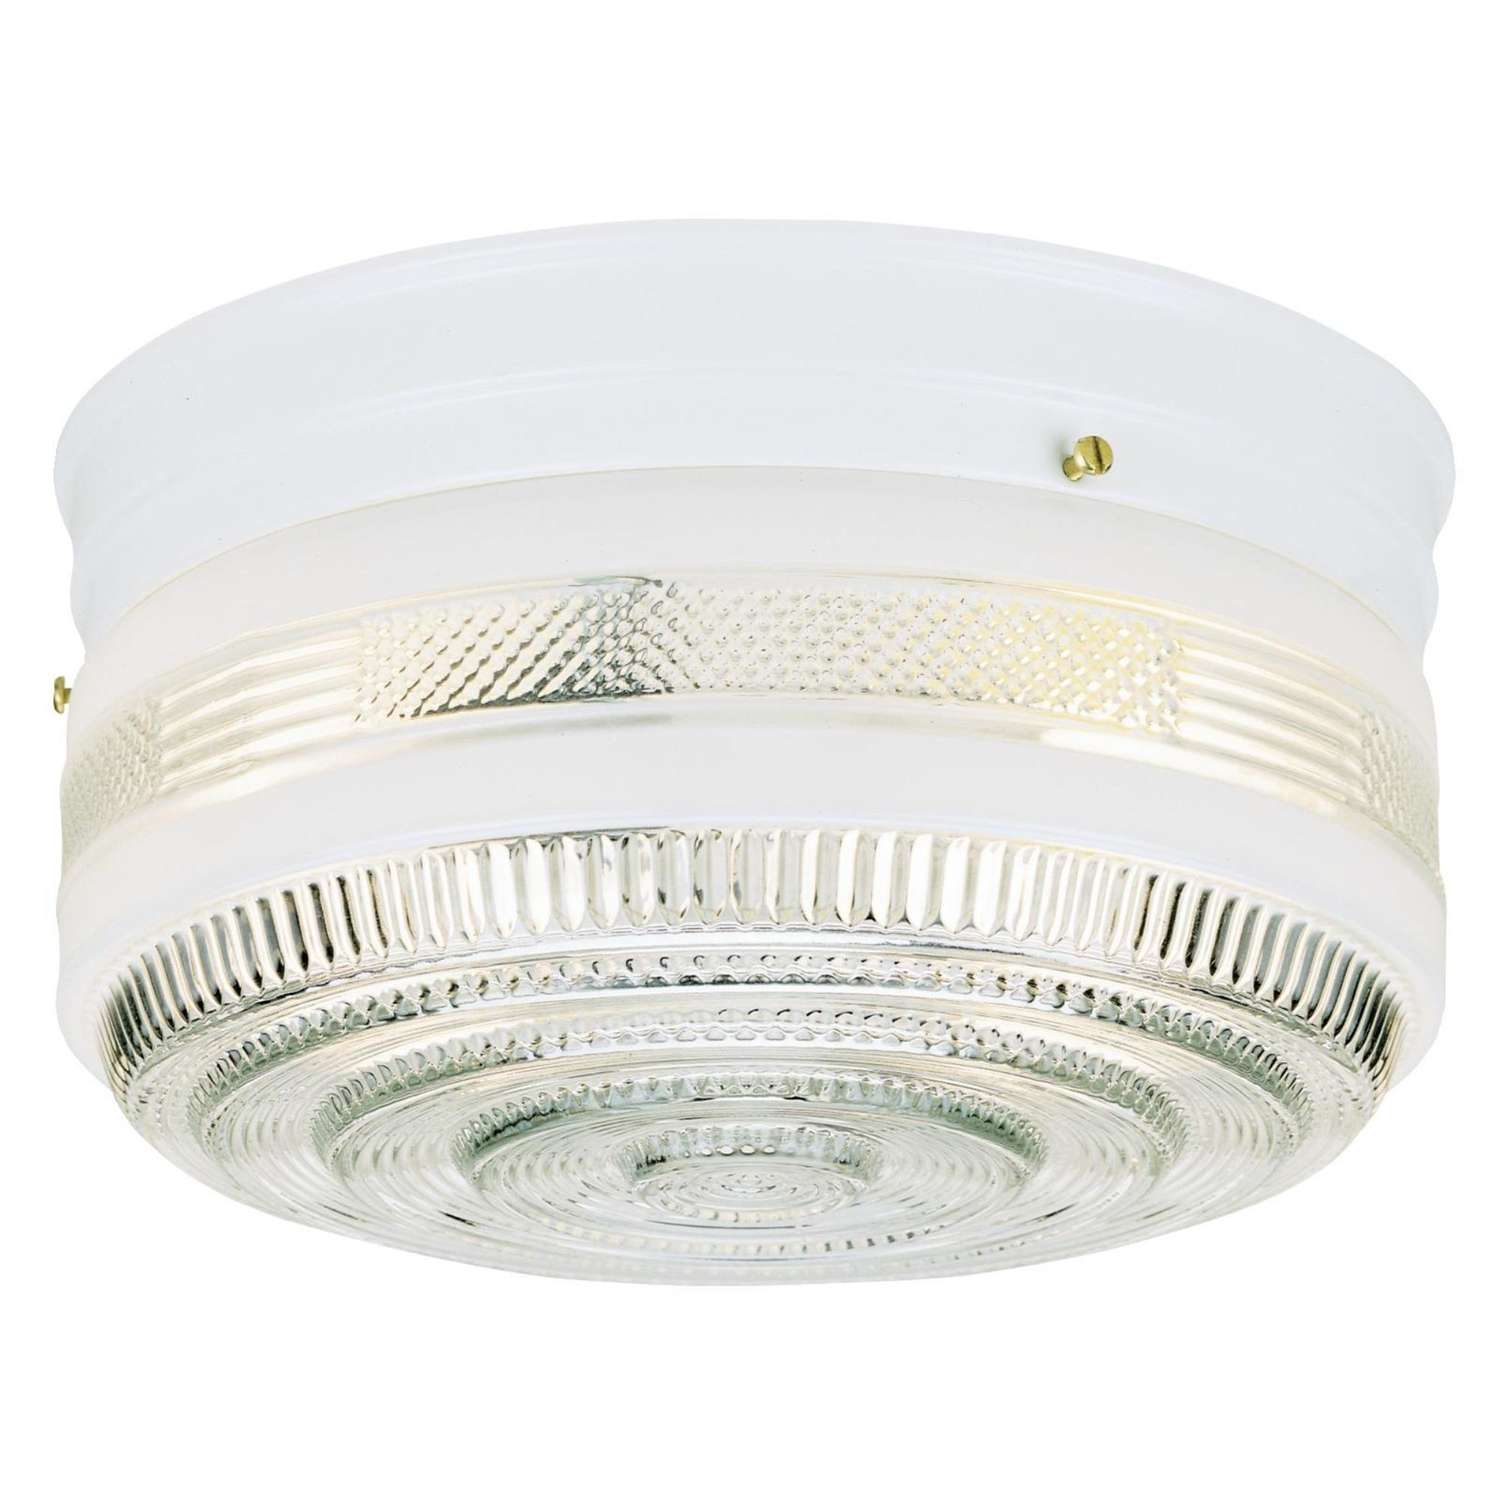 Color White  Product Type Ceiling M 10 in Brand Name Westinghouse  Diameter 